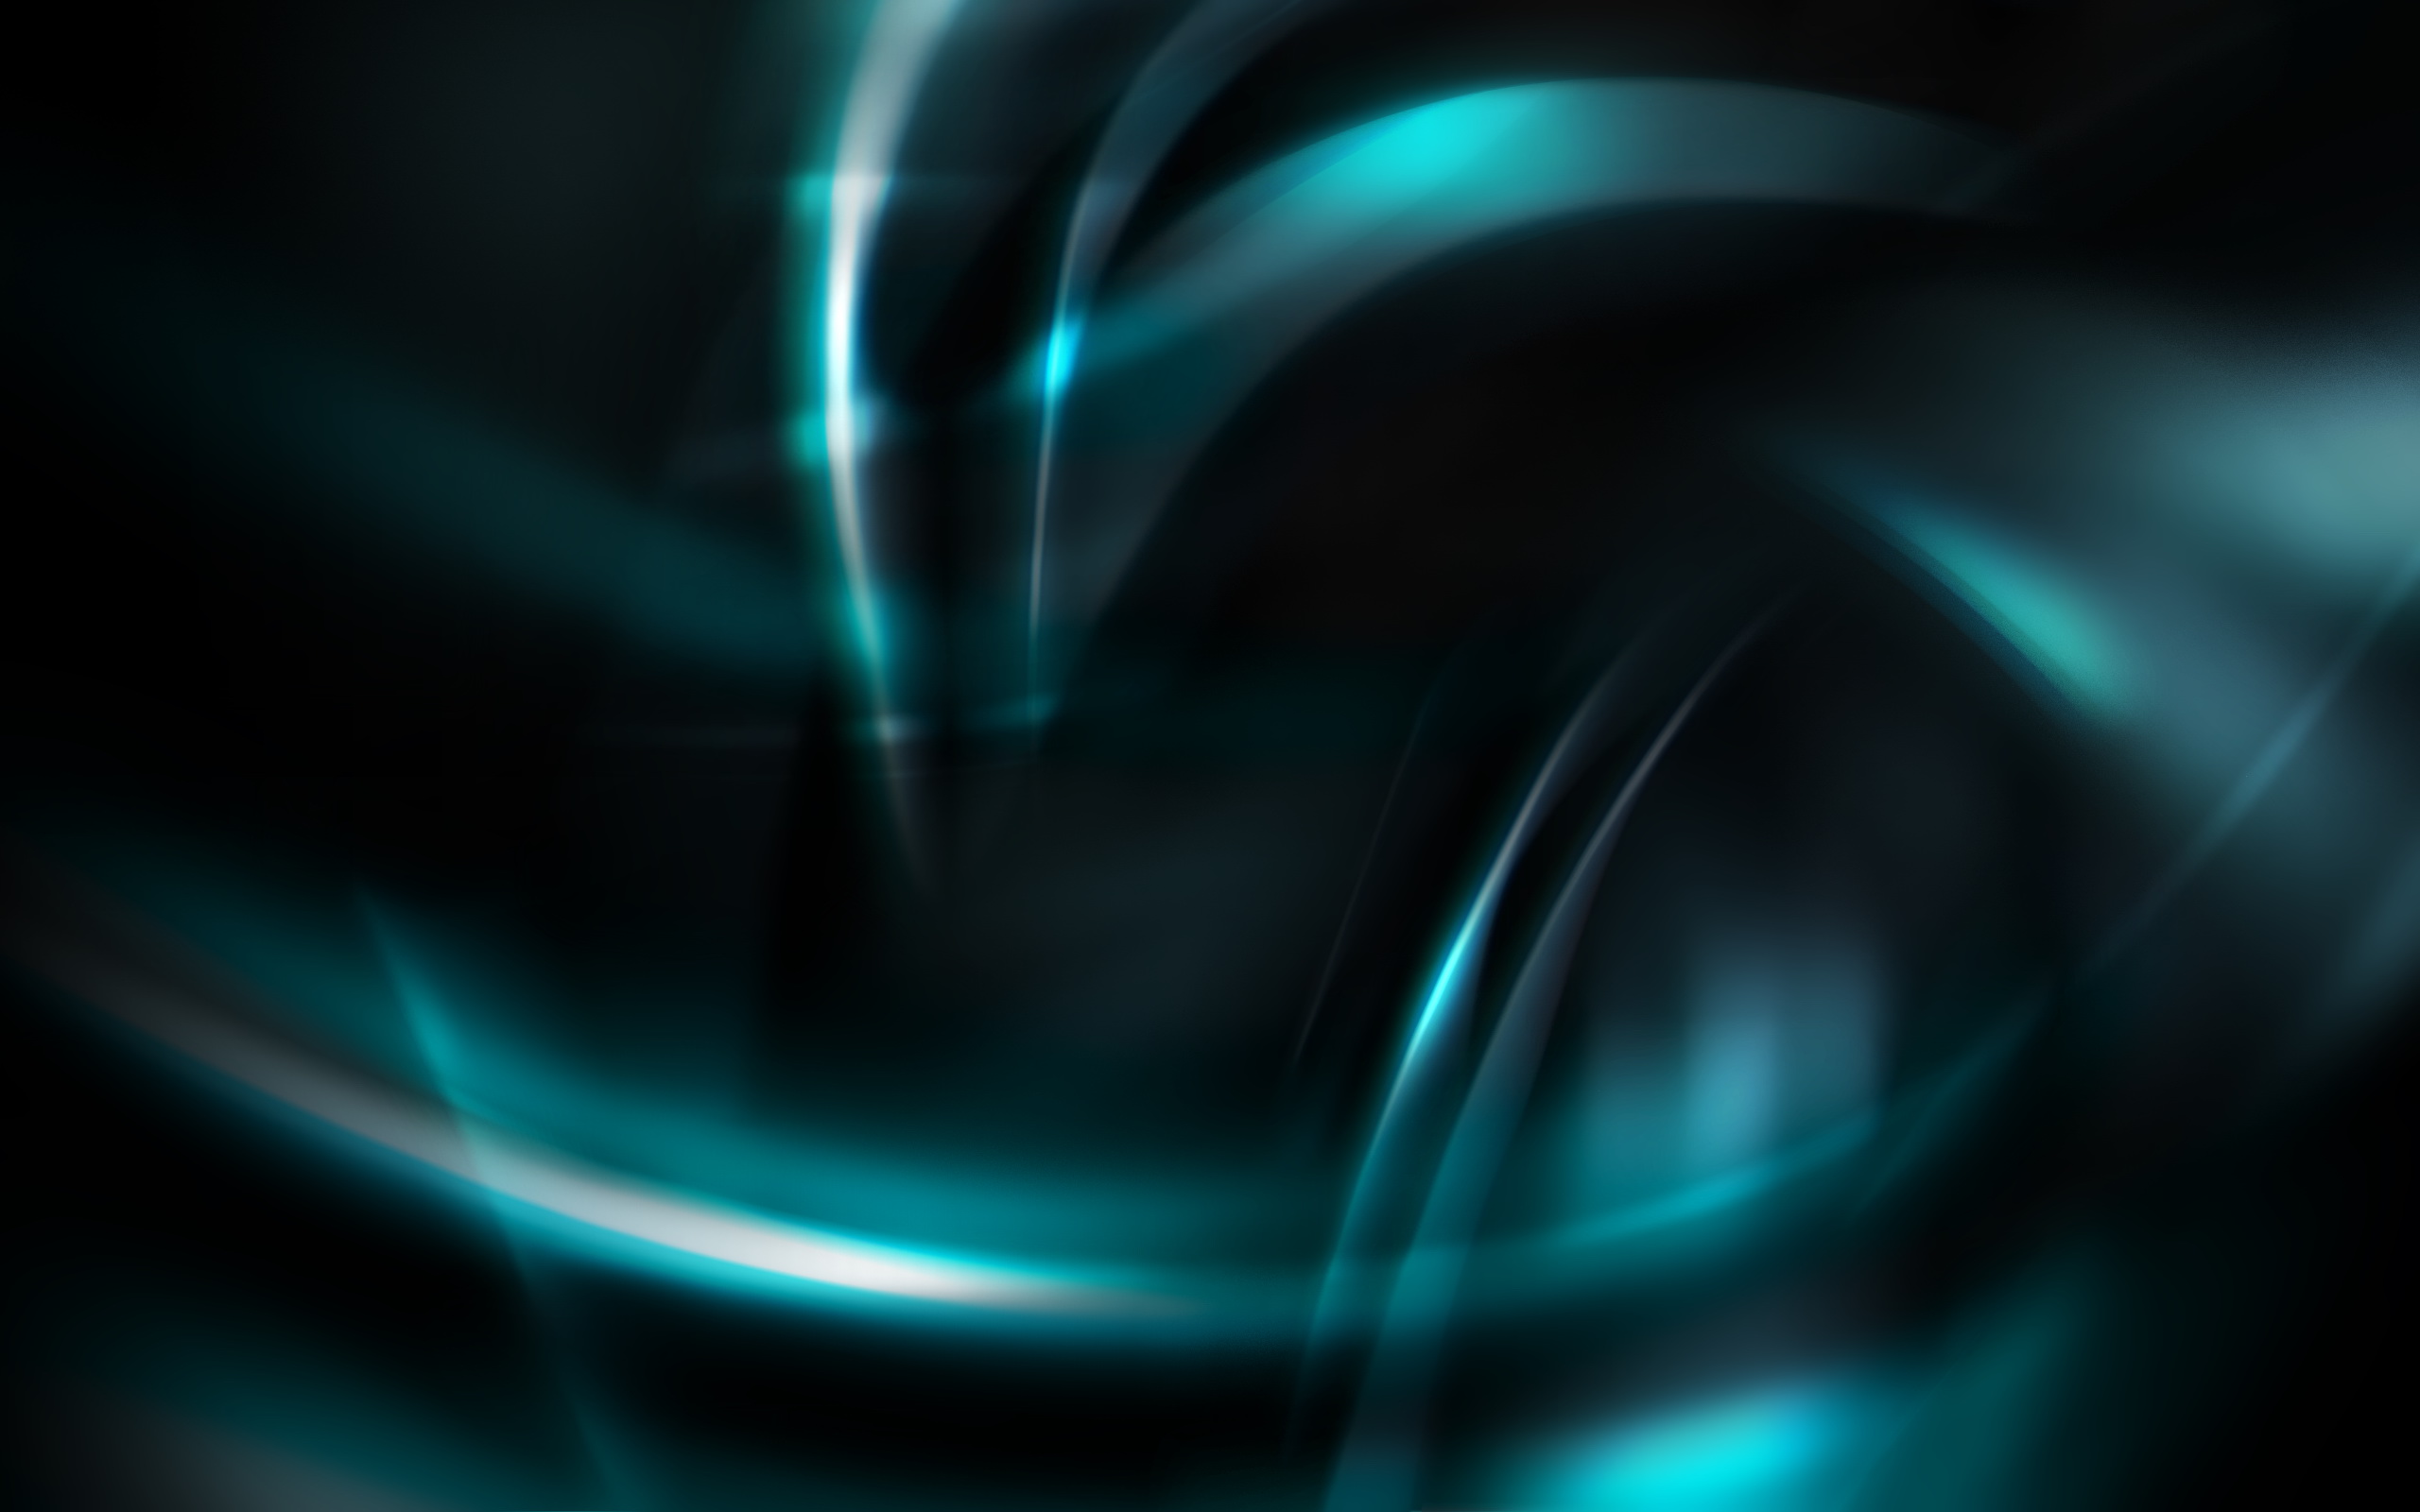 Abstract Turquoise HD Wallpaper Background Image